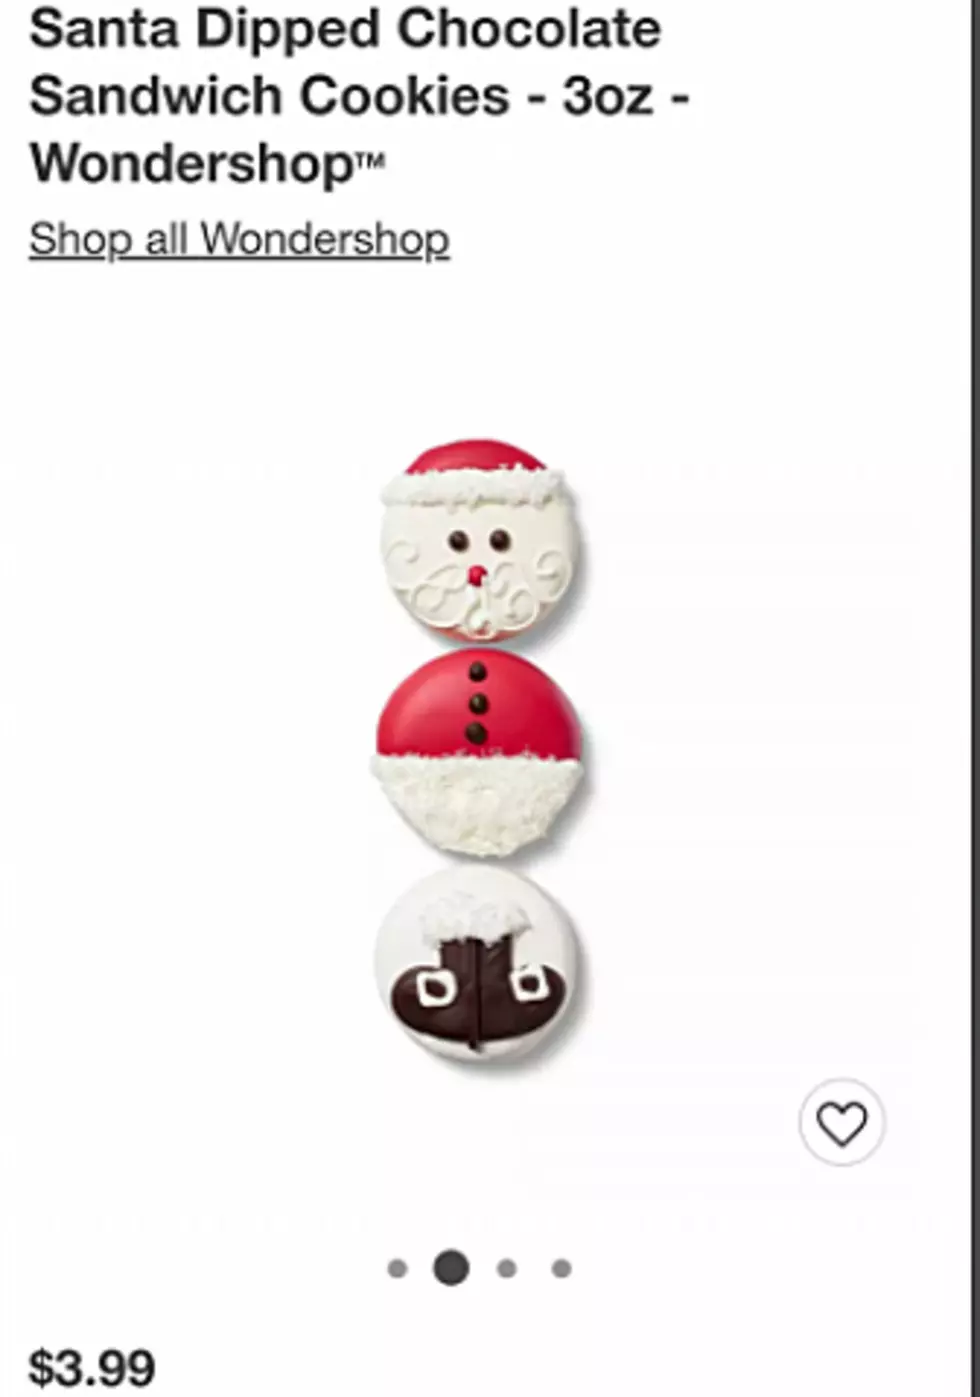 Target Selling Cookies-- Supposed to be Boots